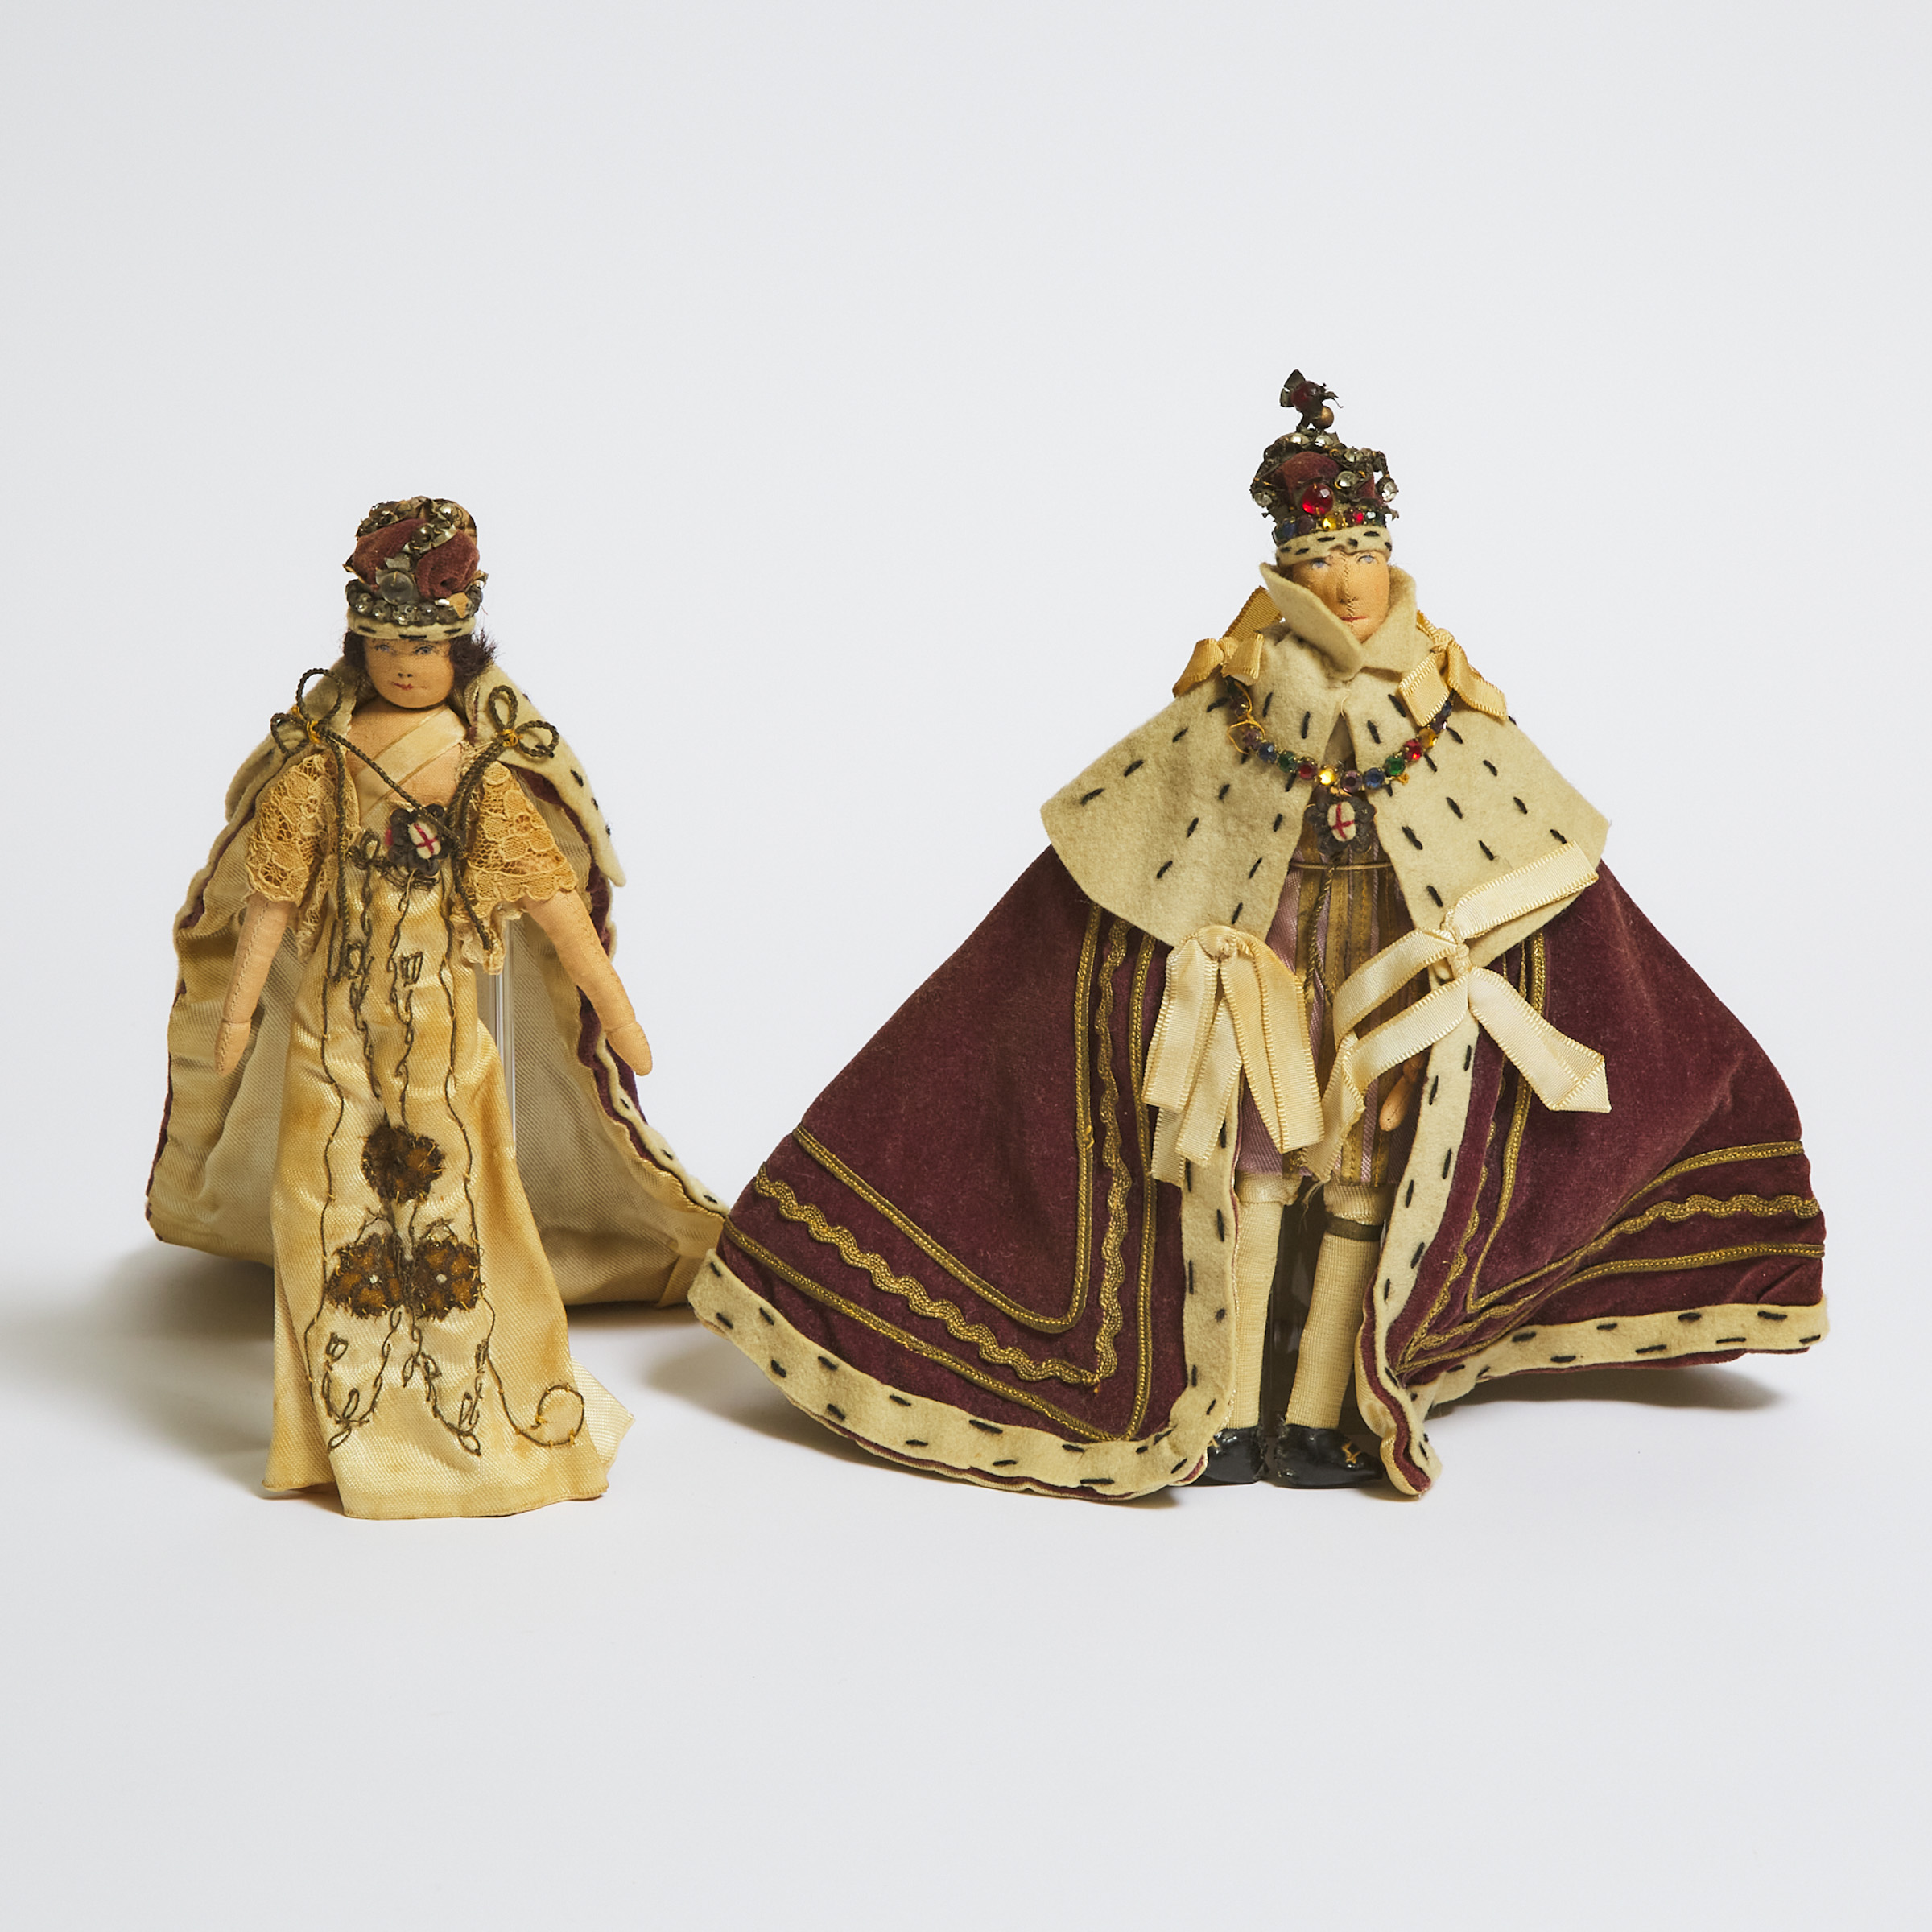 Pair of Liberty of London Coronation Dolls Depicting George VI and Queen Elizabeth, 1937